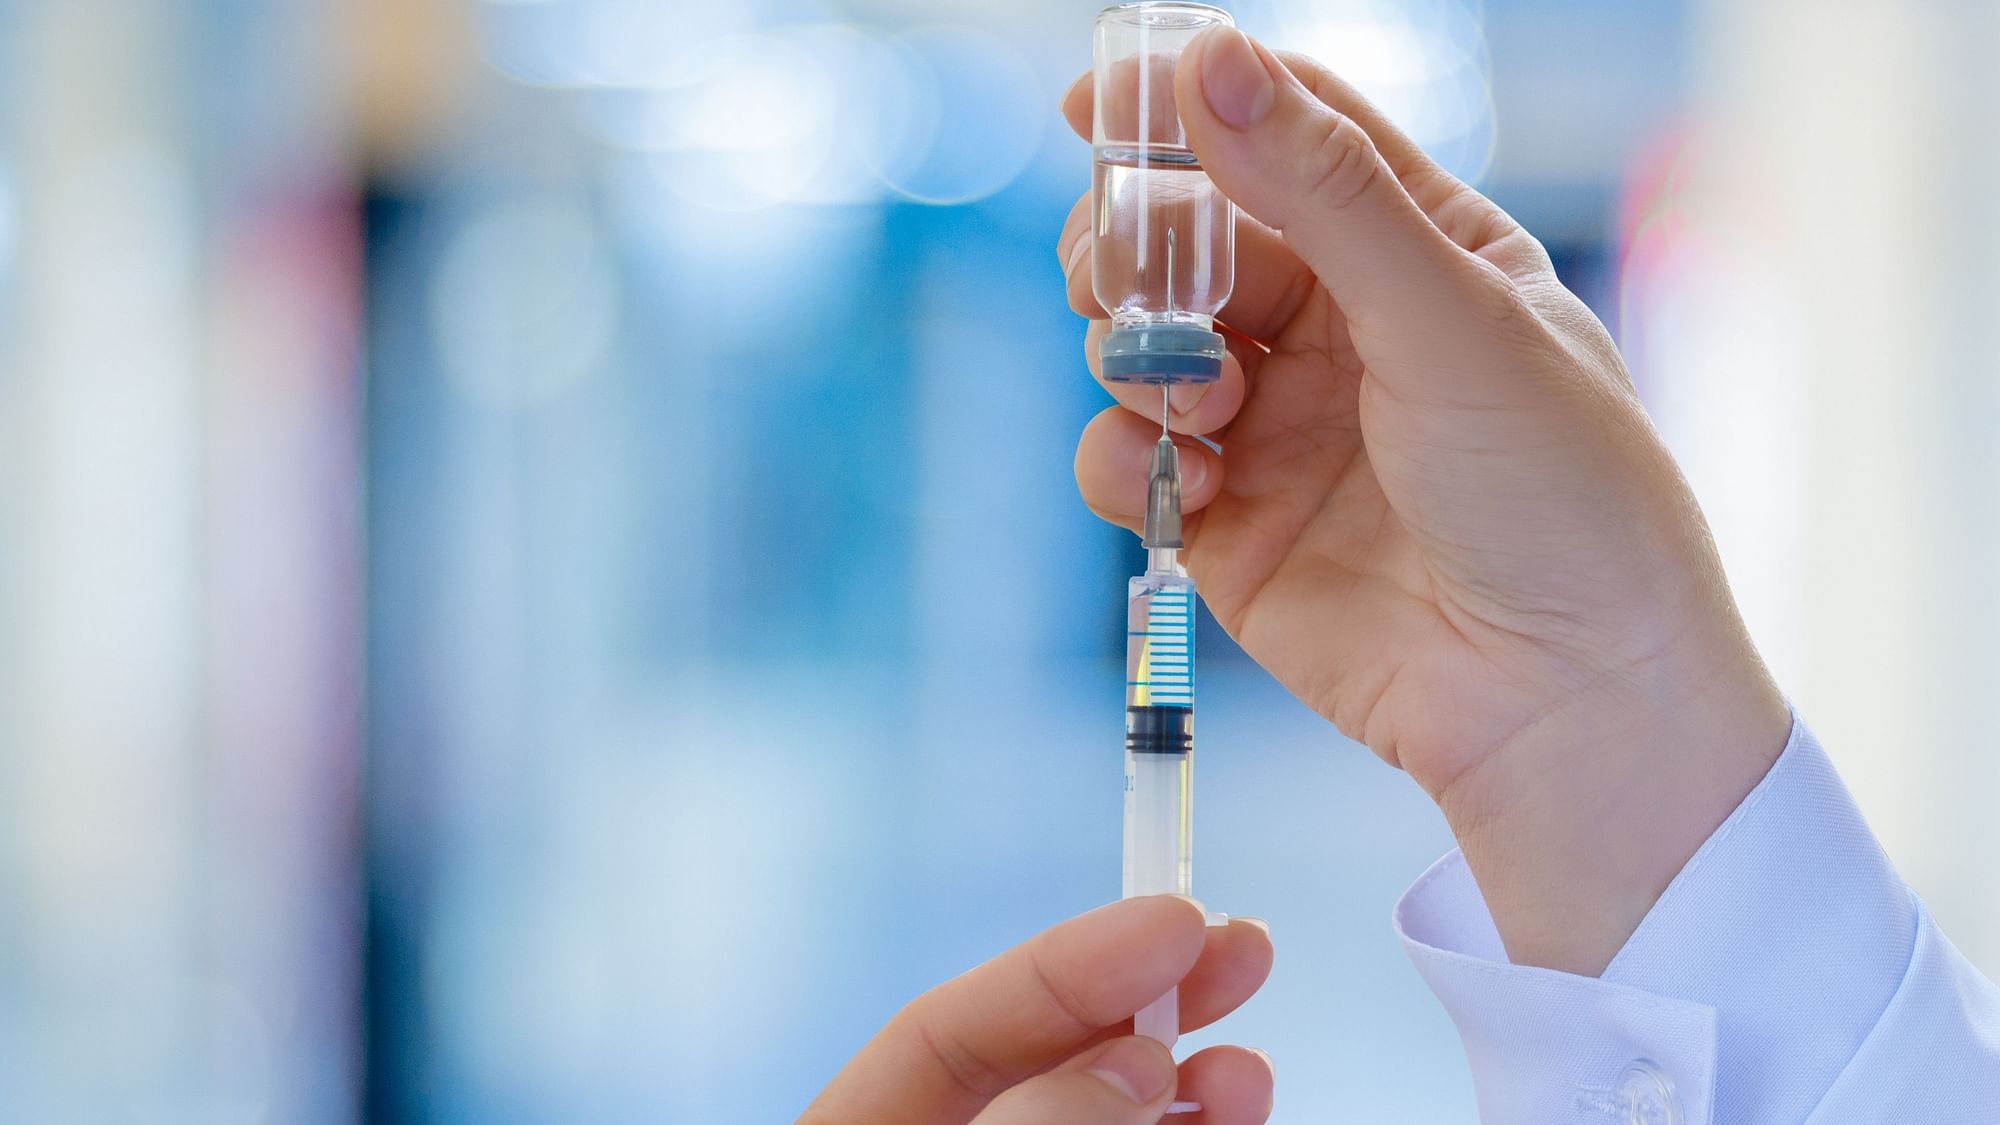 COVID-19 vaccine markers Oxford University and AstraZeneca, on Tuesday, 8 December, became the first in the world to publish final-stage clinical trial data in a scientific journal, reported AFP.